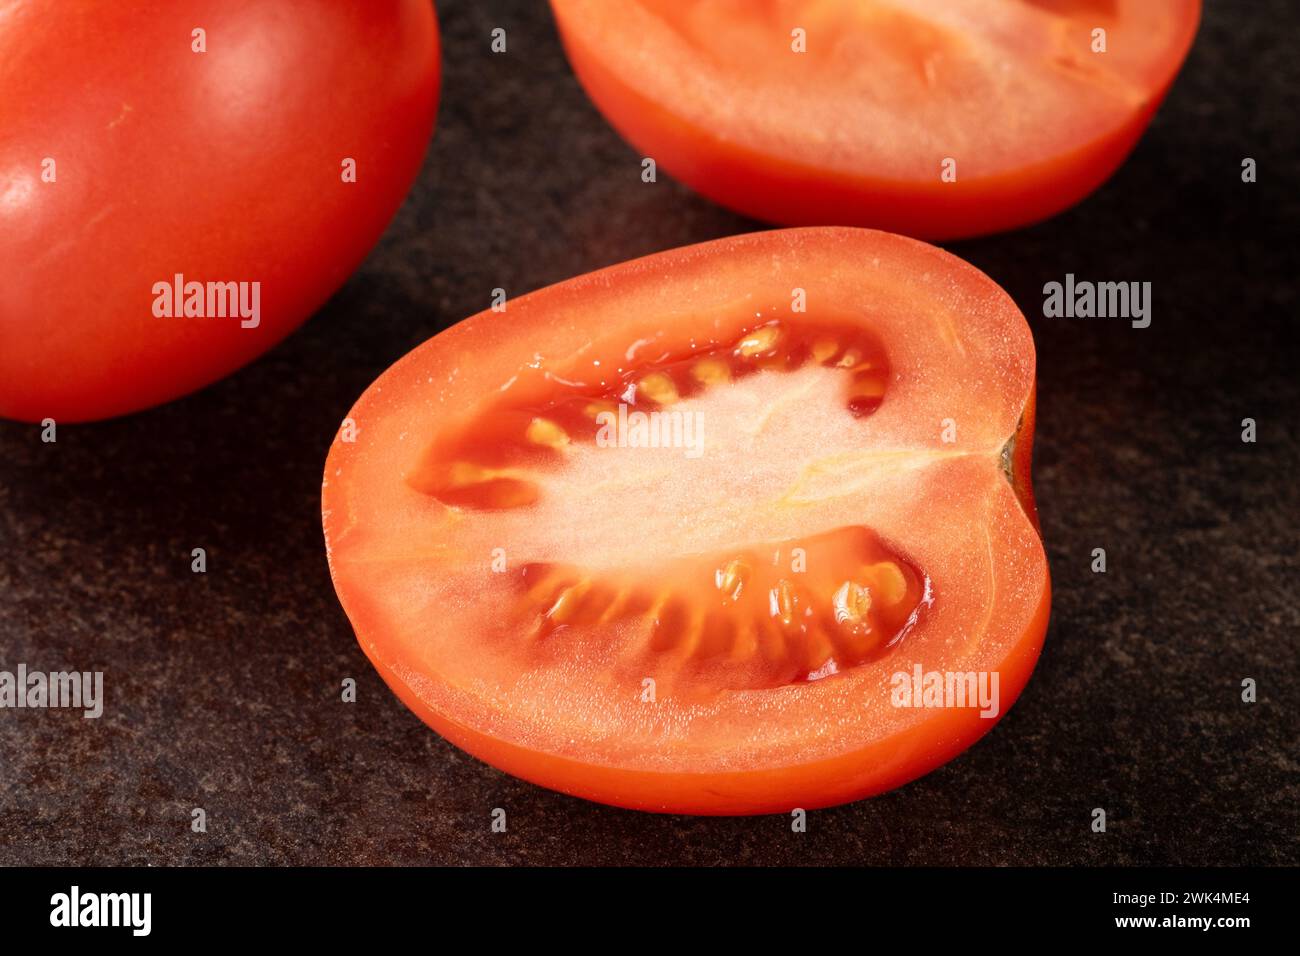 A close-up of a vibrant, freshly sliced tomato, with water droplets glistening on its surface, displayed on a sleek and elegant black background, perf Stock Photo